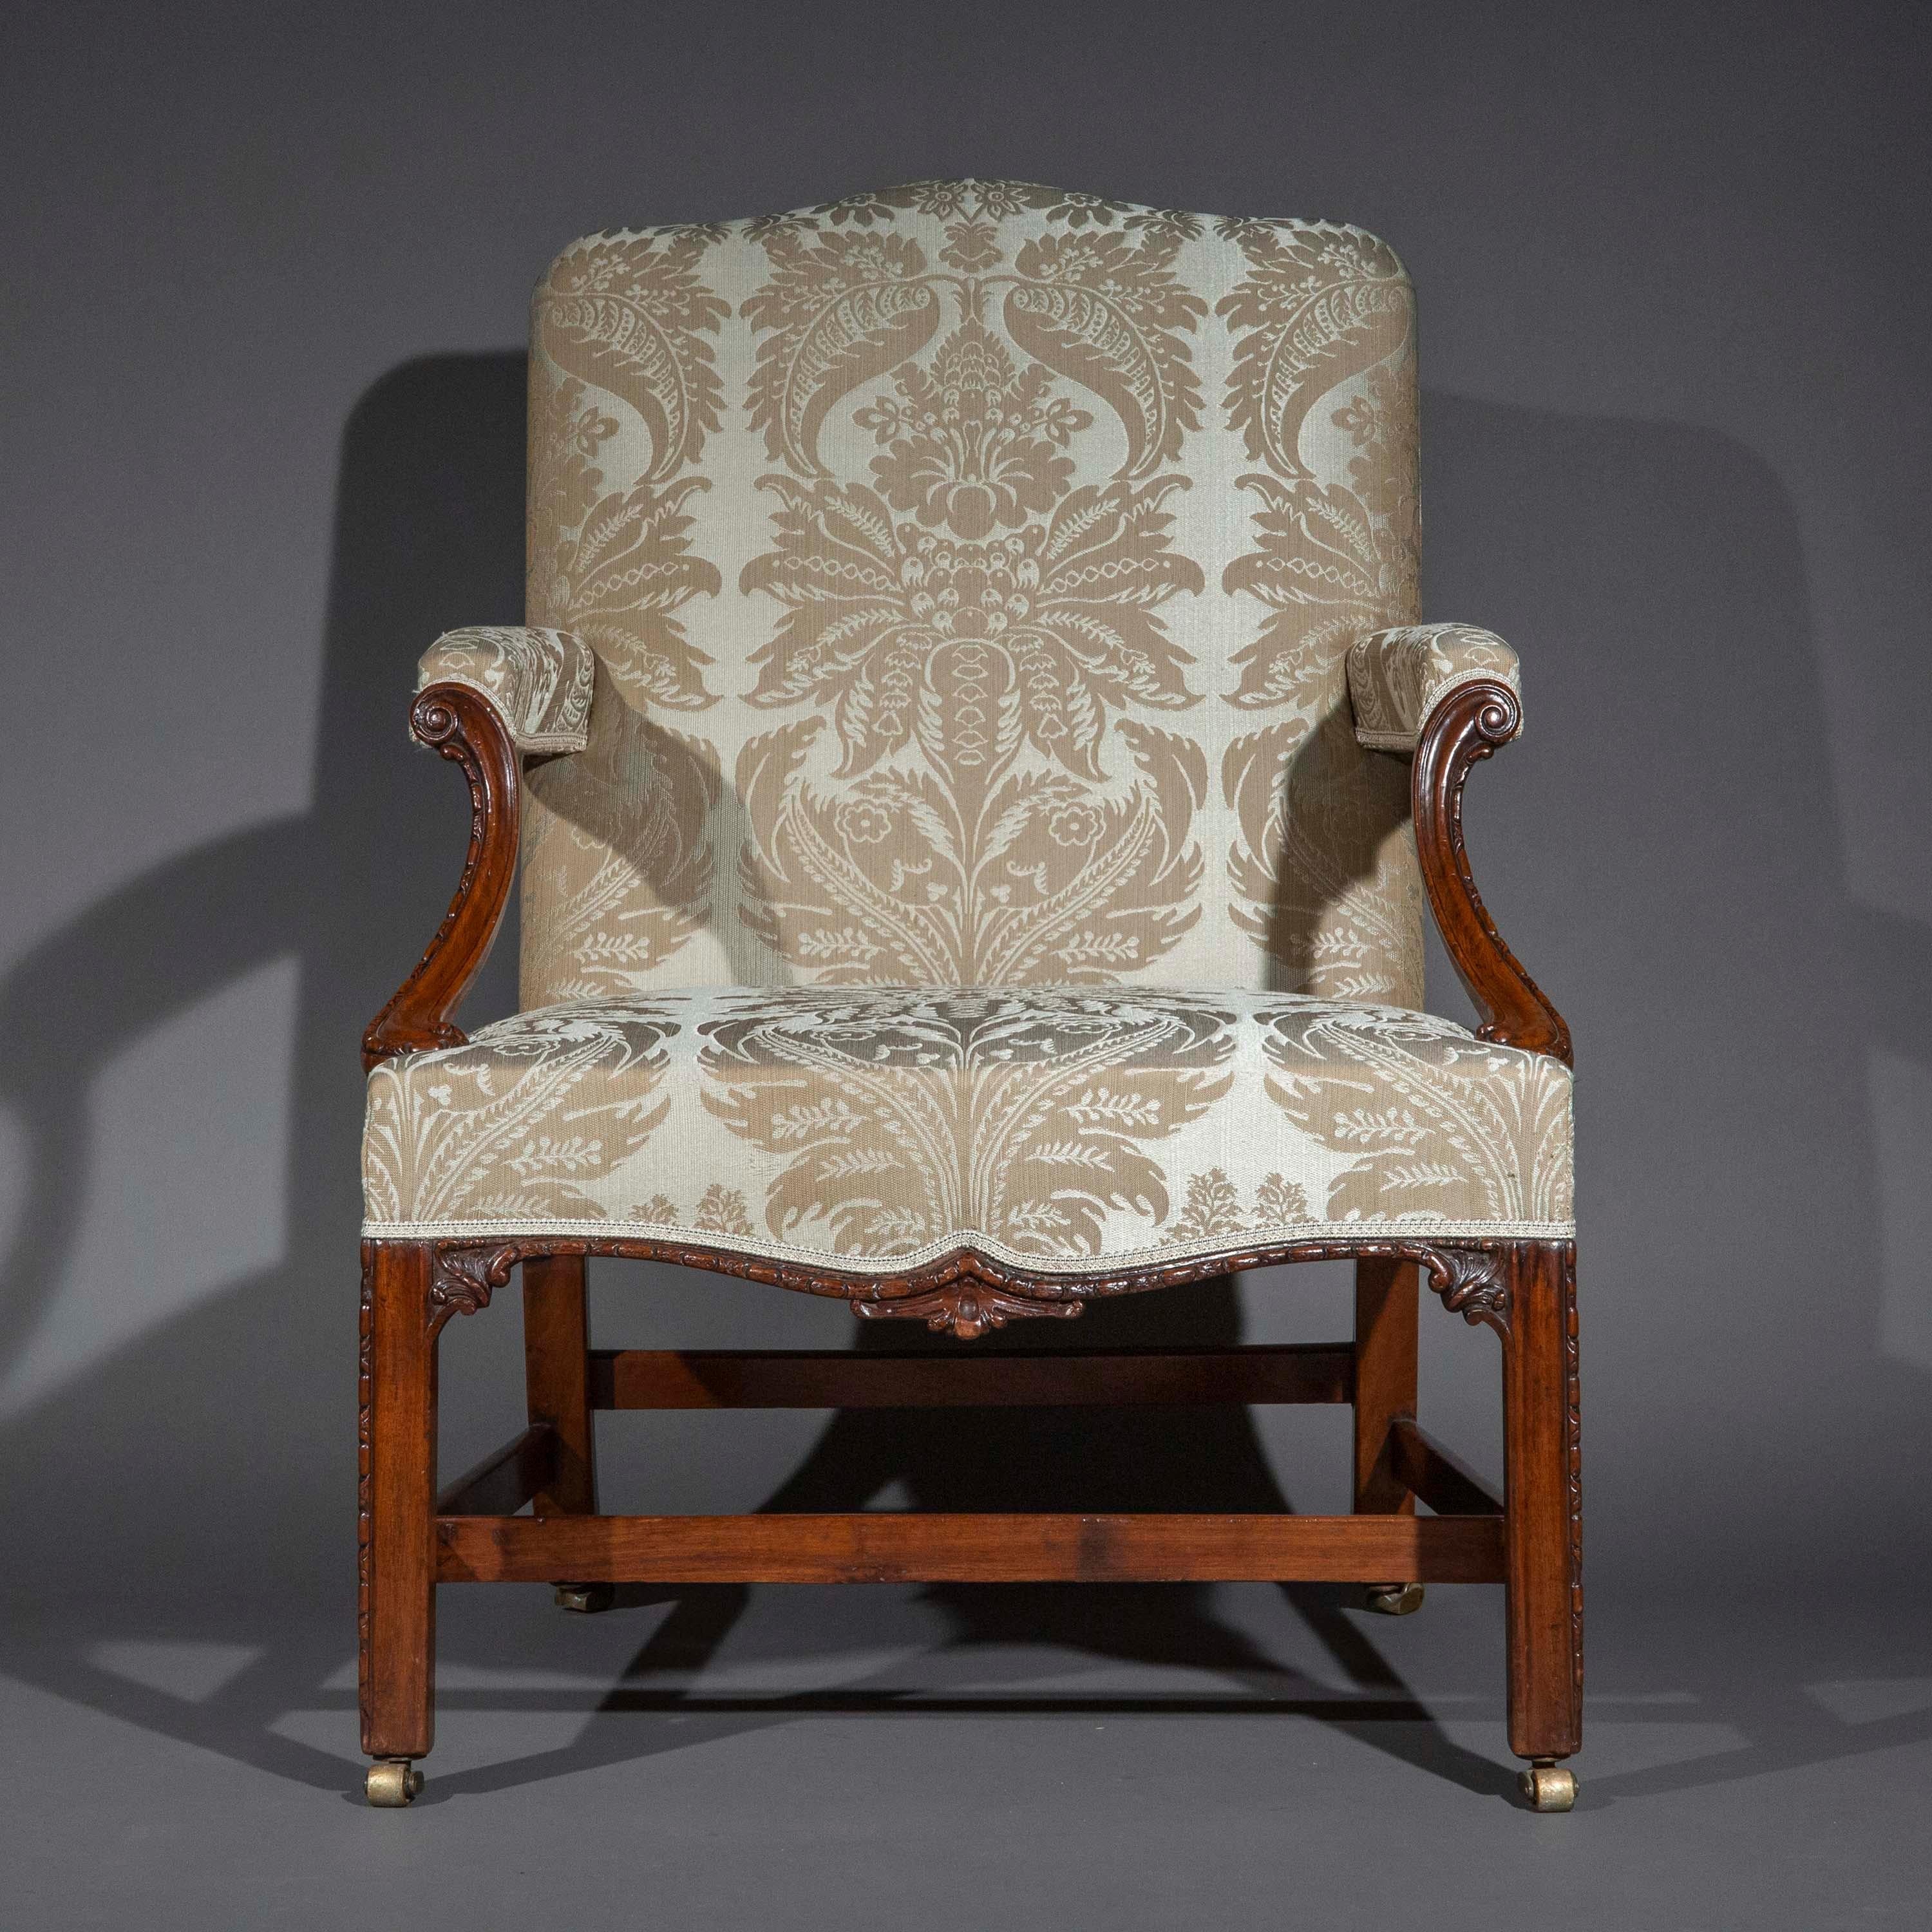 Large English Chippendale Gainsborough Armchair, mid-18th Century For Sale 2